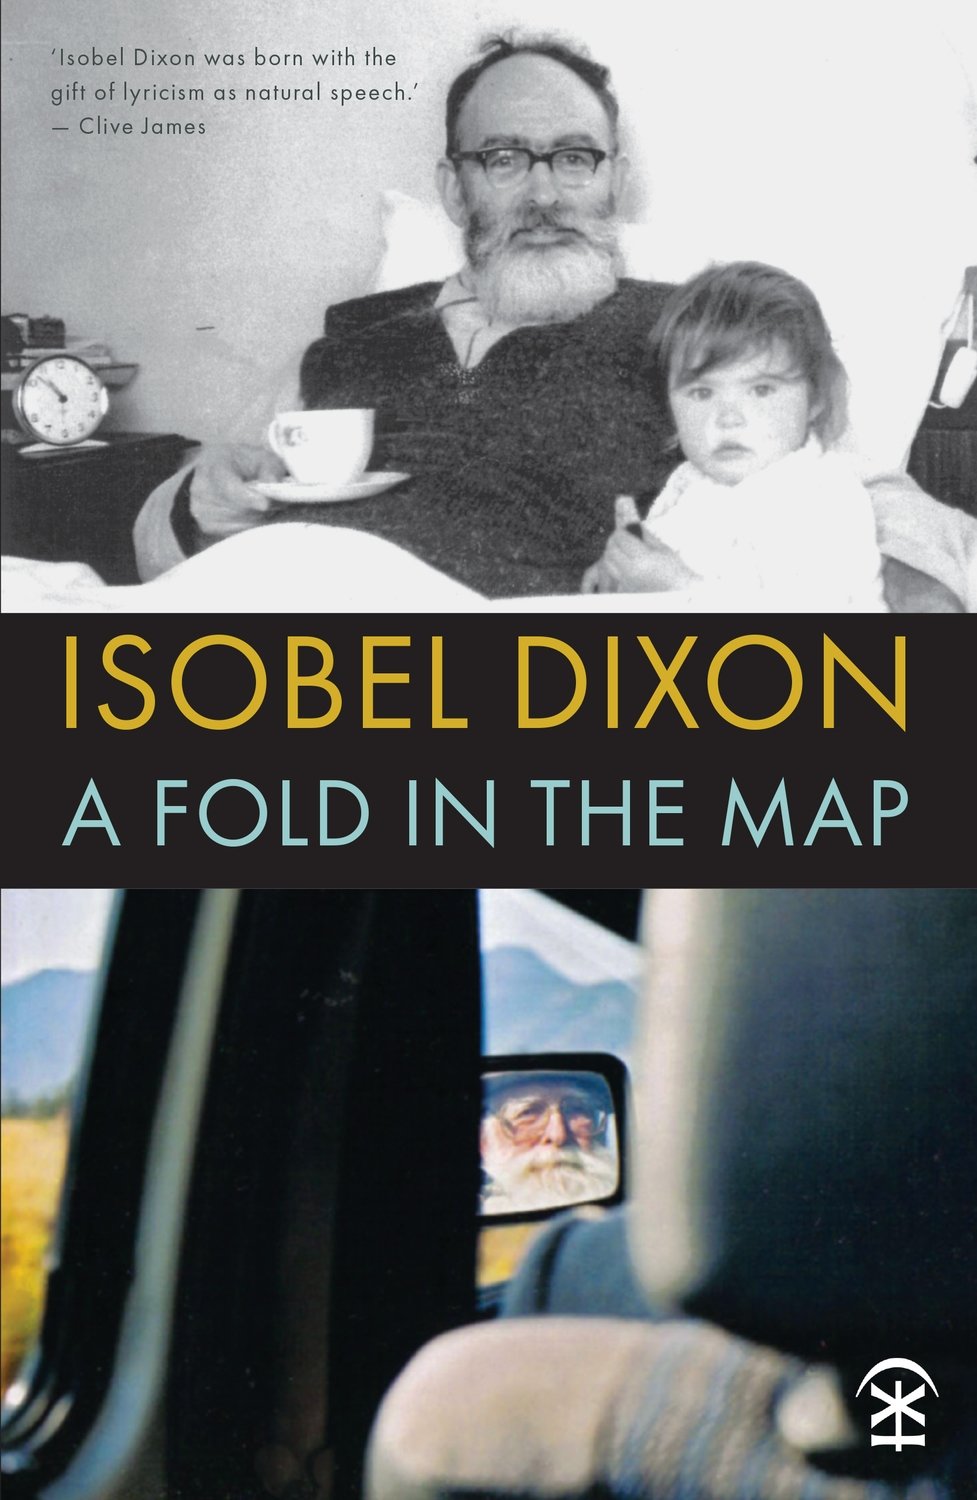 A Fold In The Map - Isobel Dixon